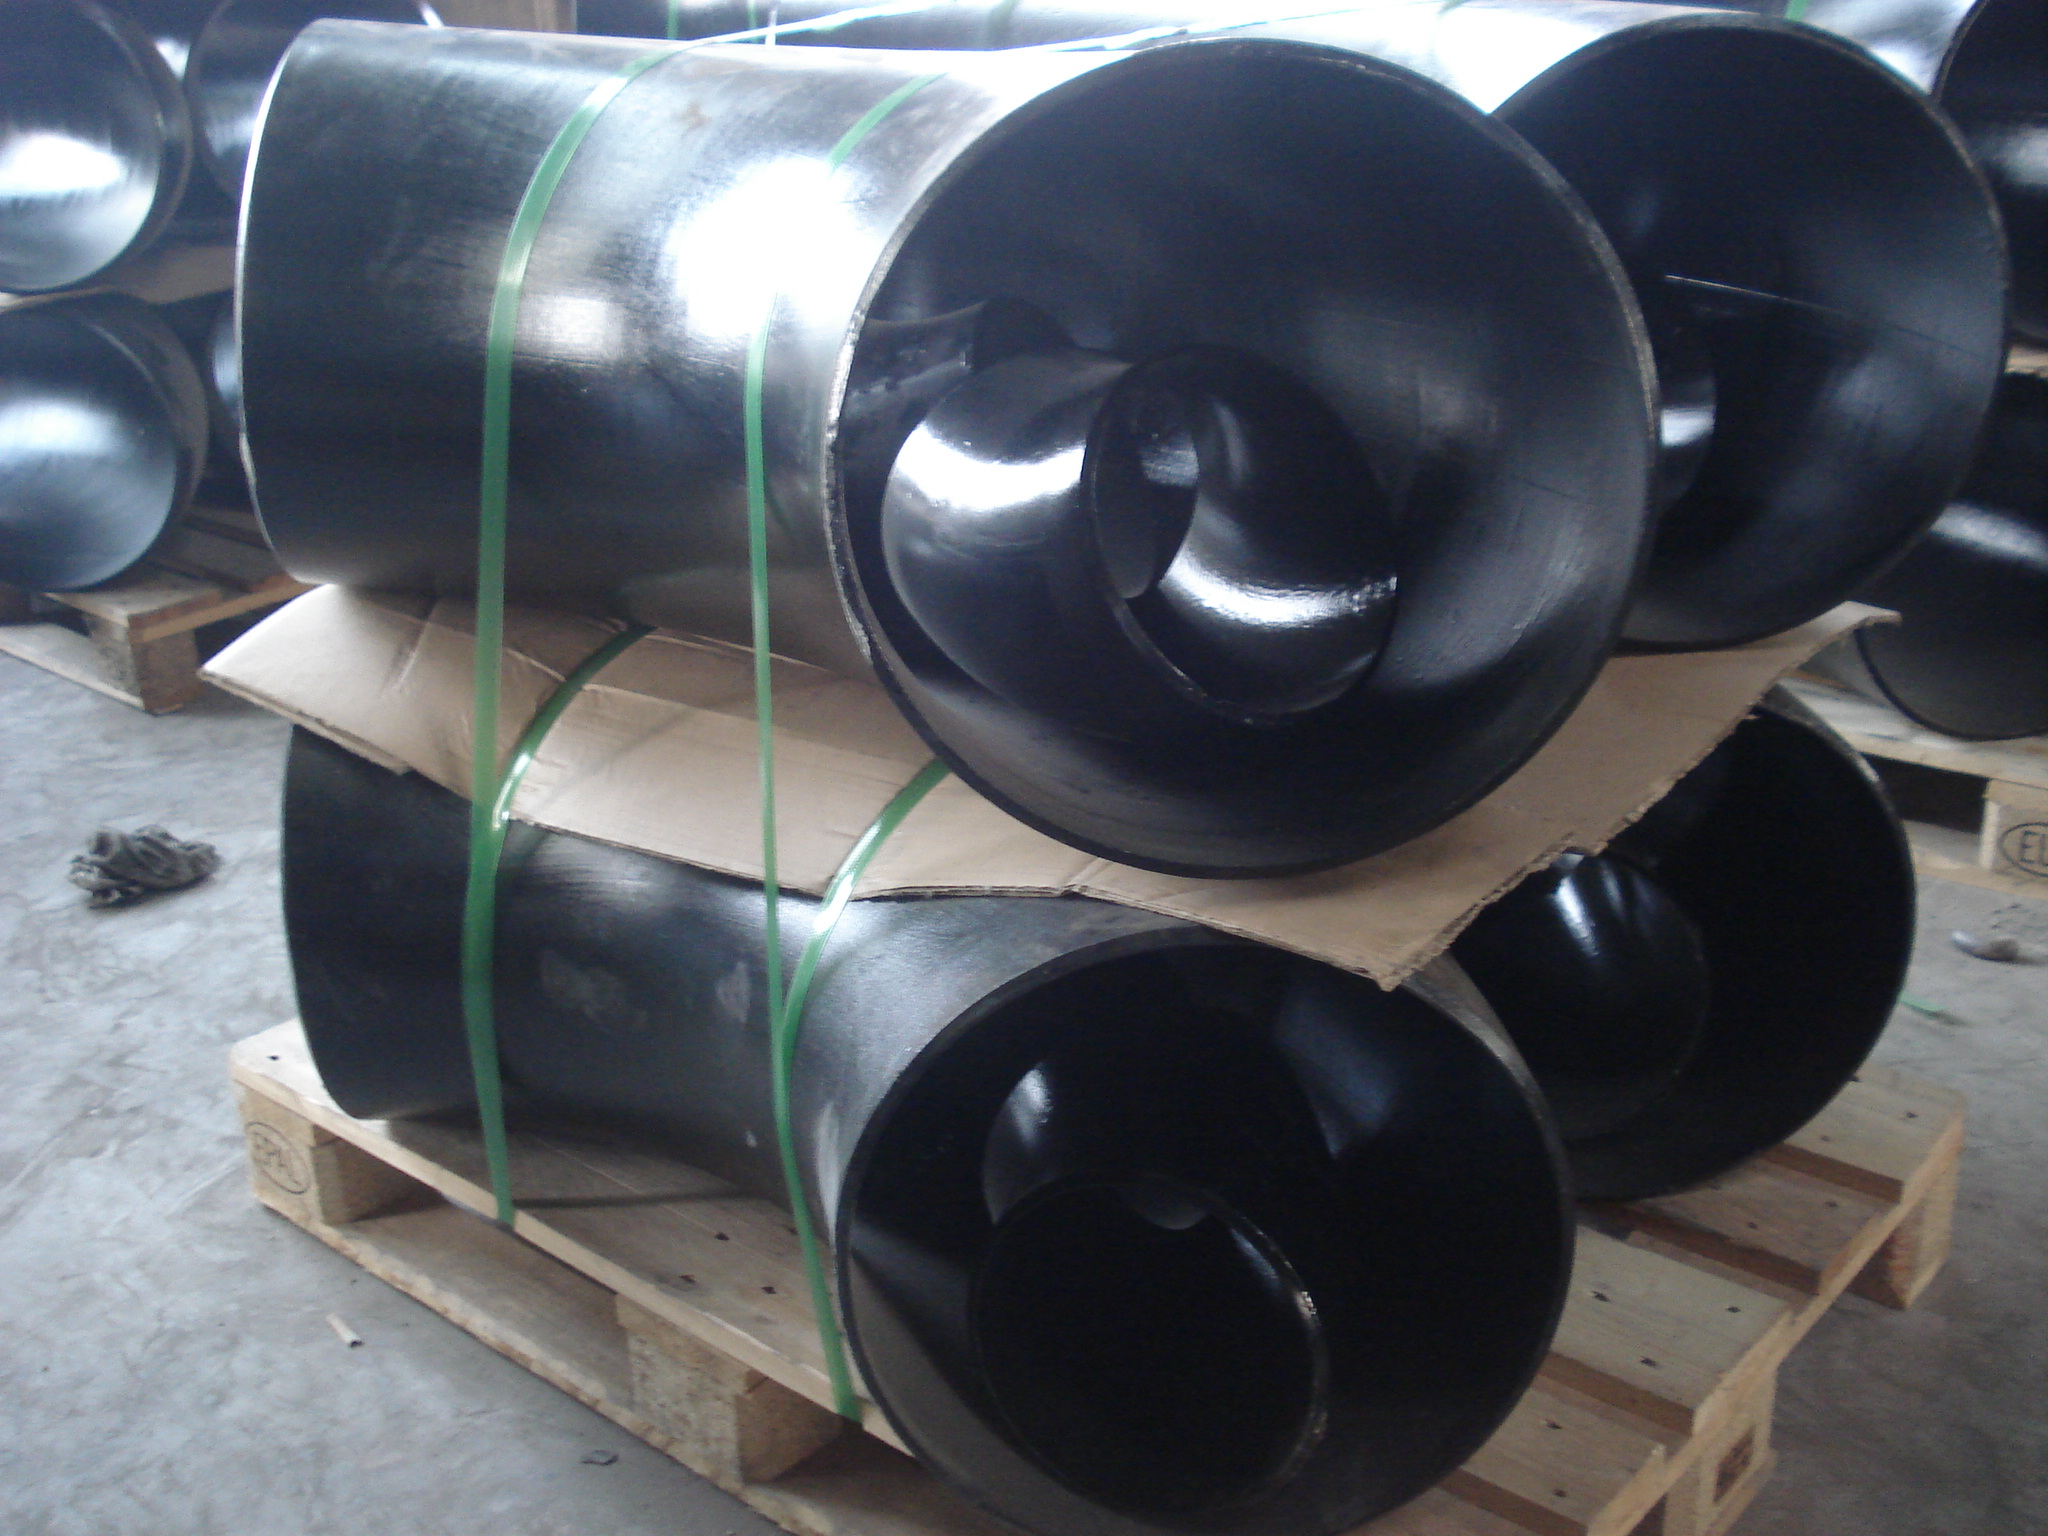 Carbon Steel Pipe Fittings Manufacturer Supplier Wholesale Exporter Importer Buyer Trader Retailer in Qingyun  China